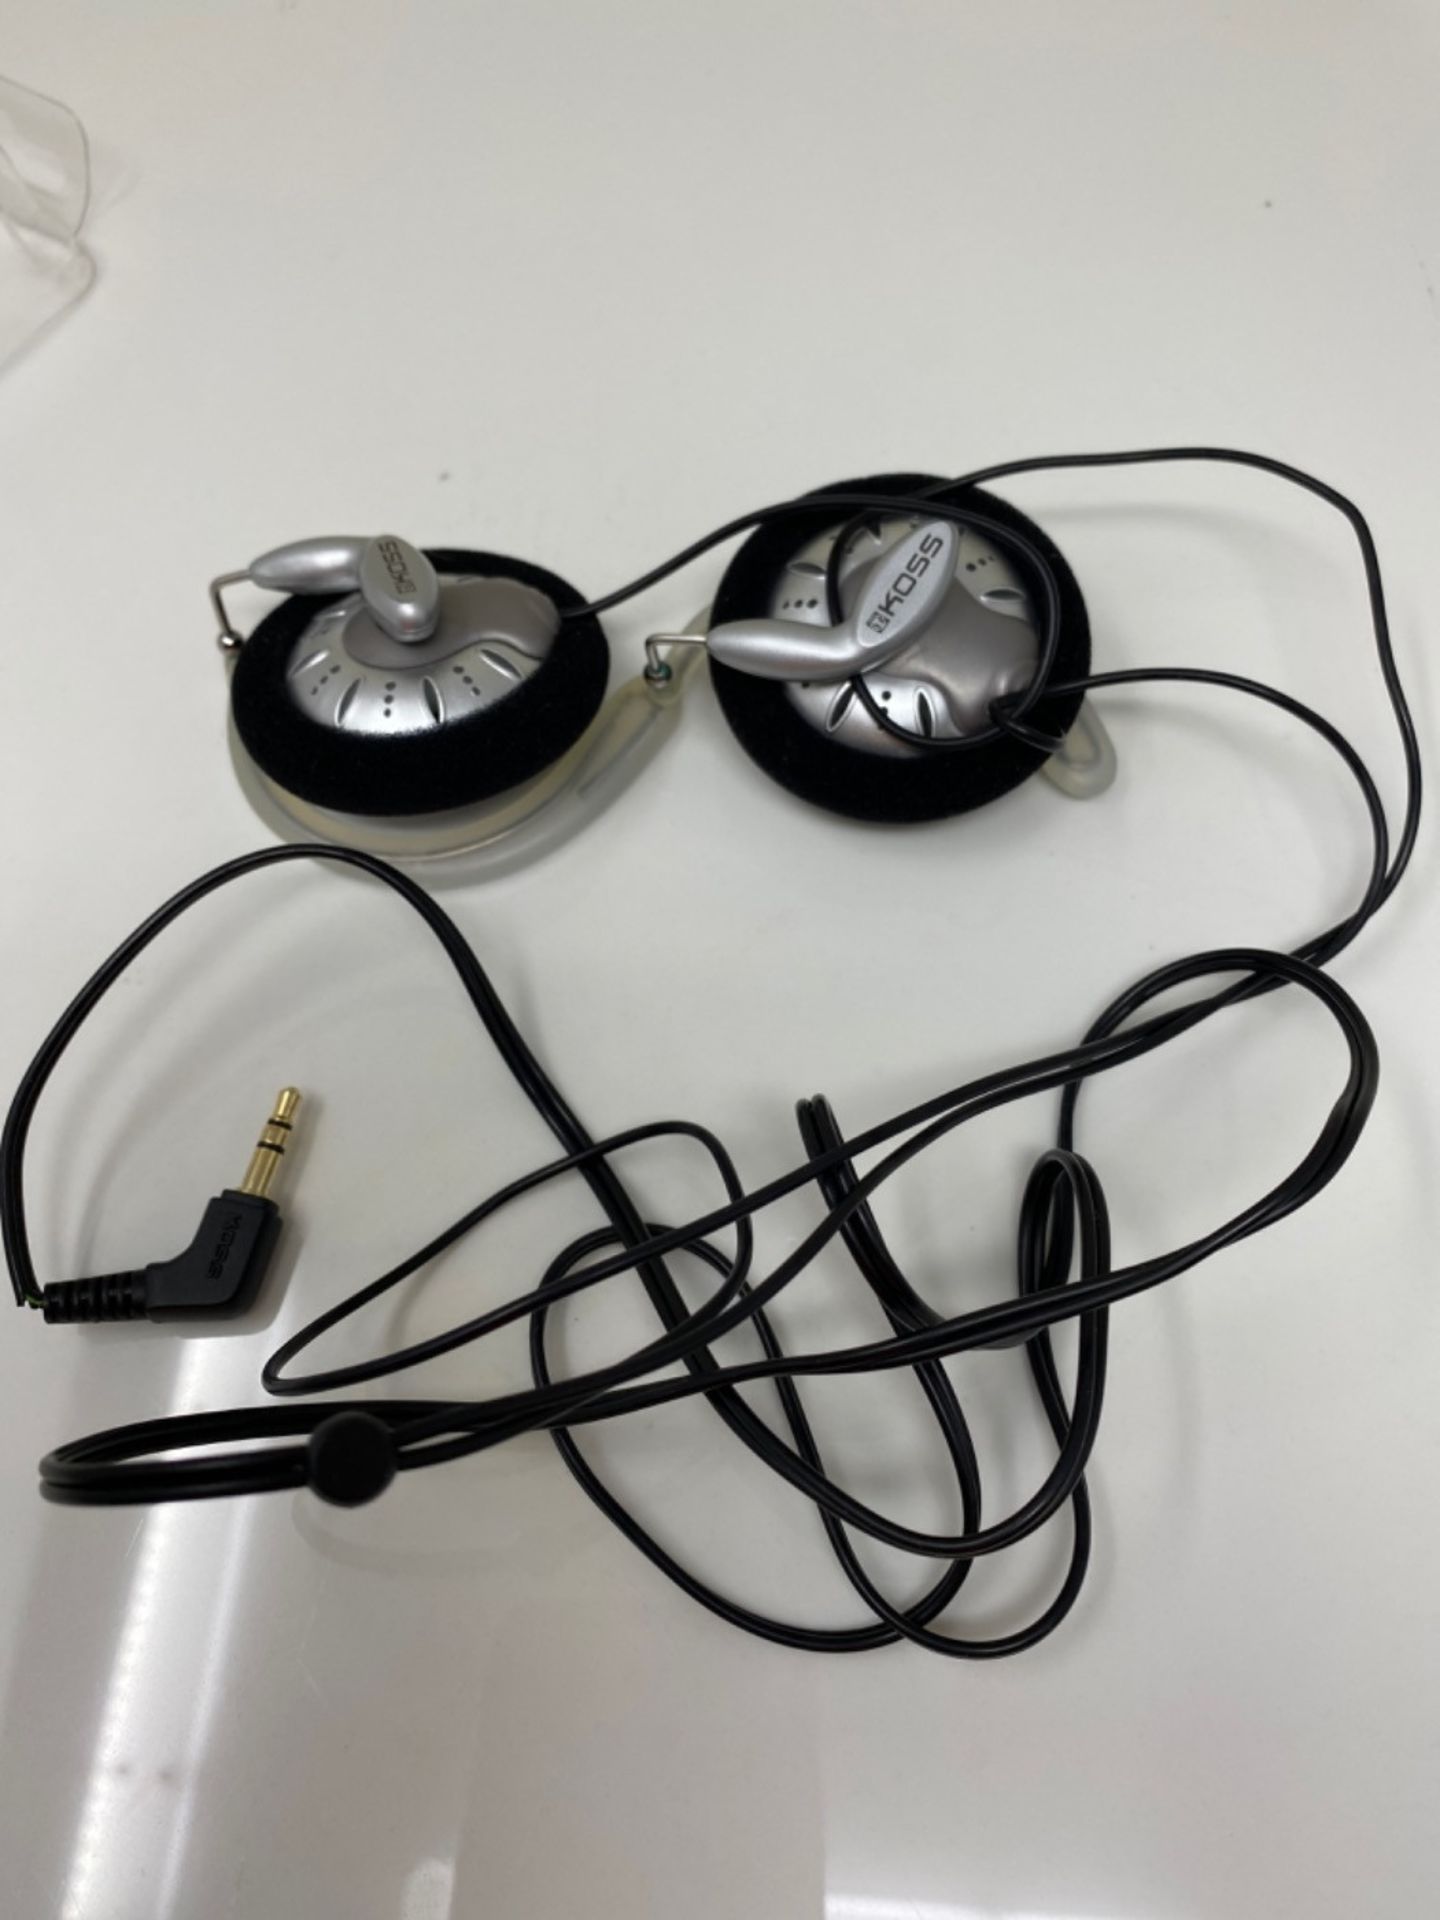 Koss KSC75 Clip-On Stereo Headphones for iPod, iPhone, MP3 and Smartphone - Black / Si - Image 3 of 3